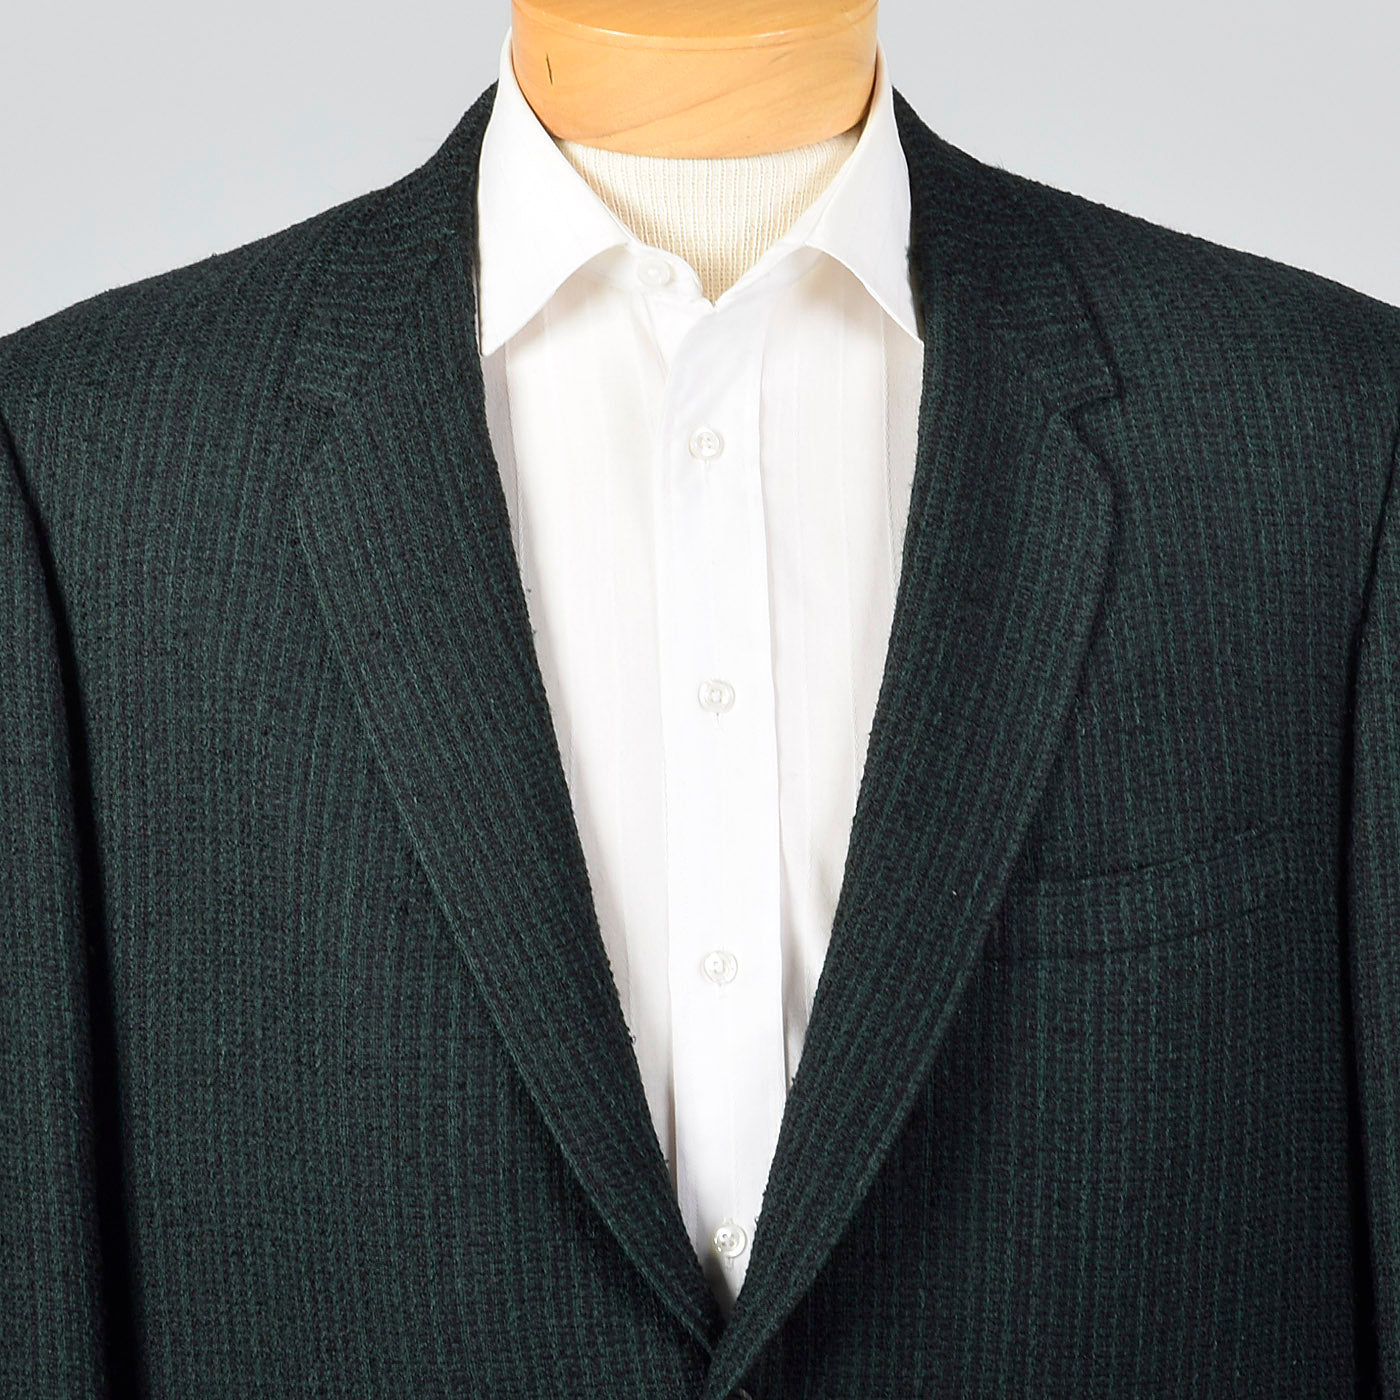 1960s Mens Black with Green Stripe Jacket in a Textured Weave